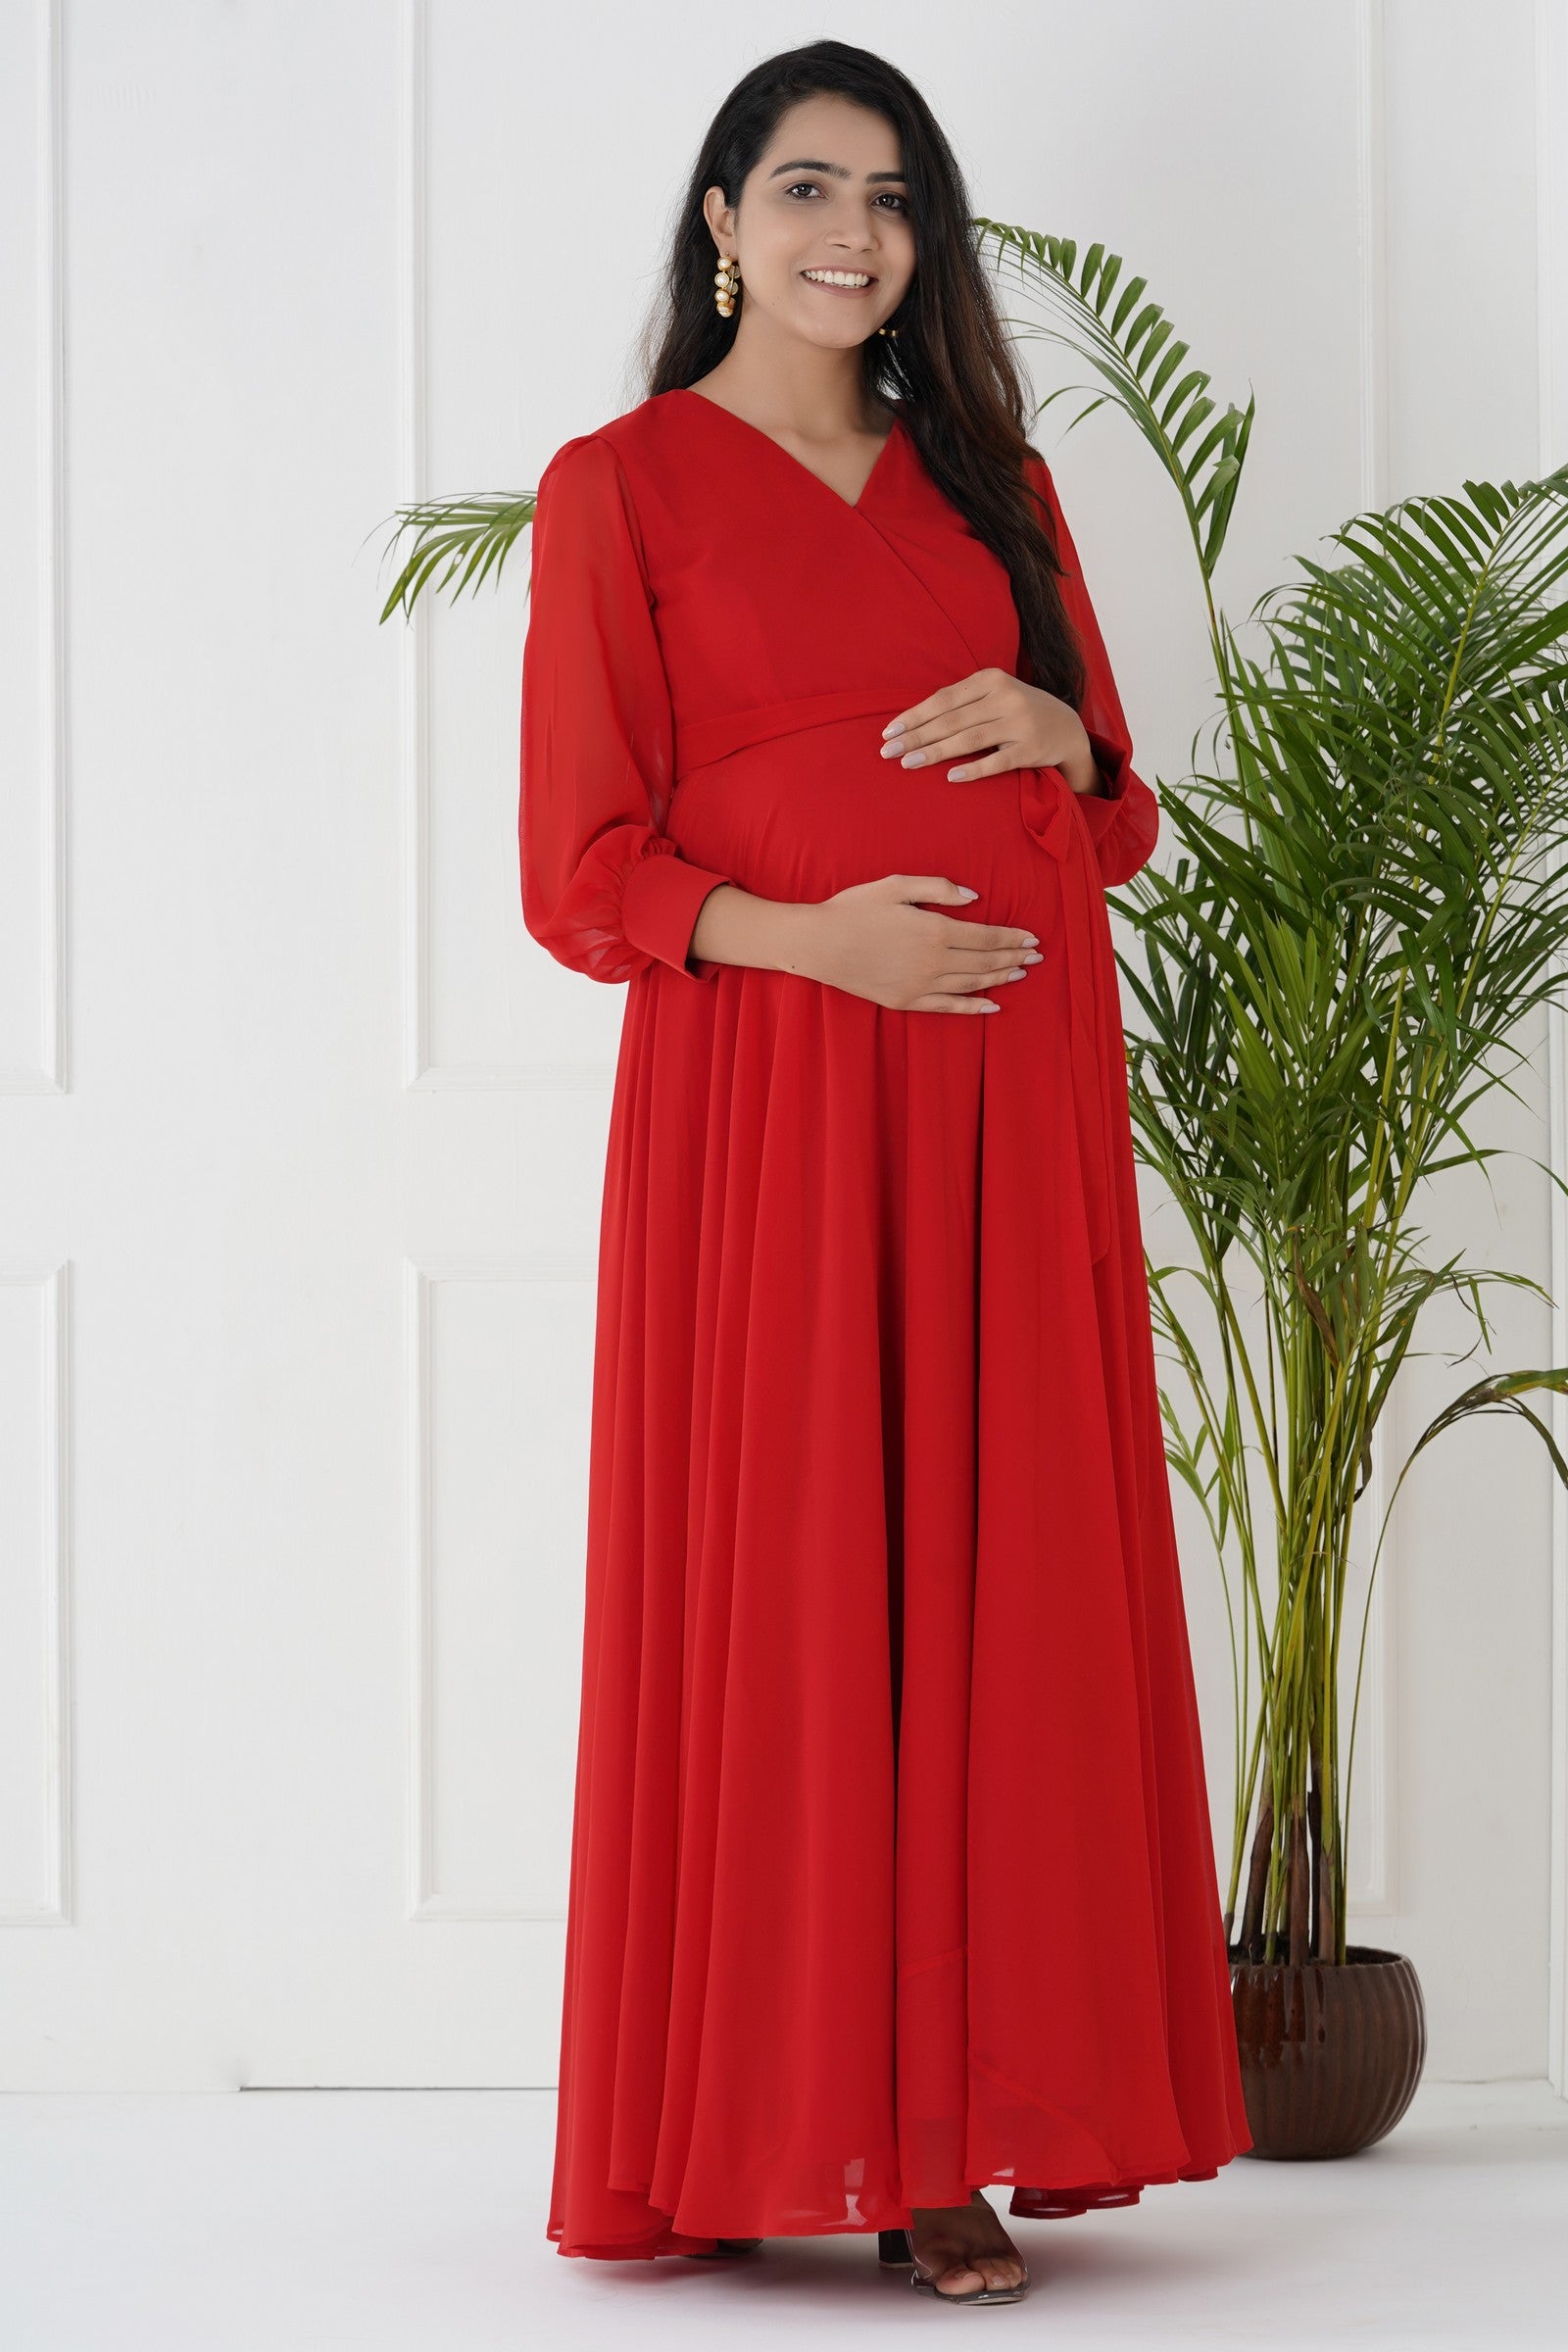 Maternity Gown For Photoshoot